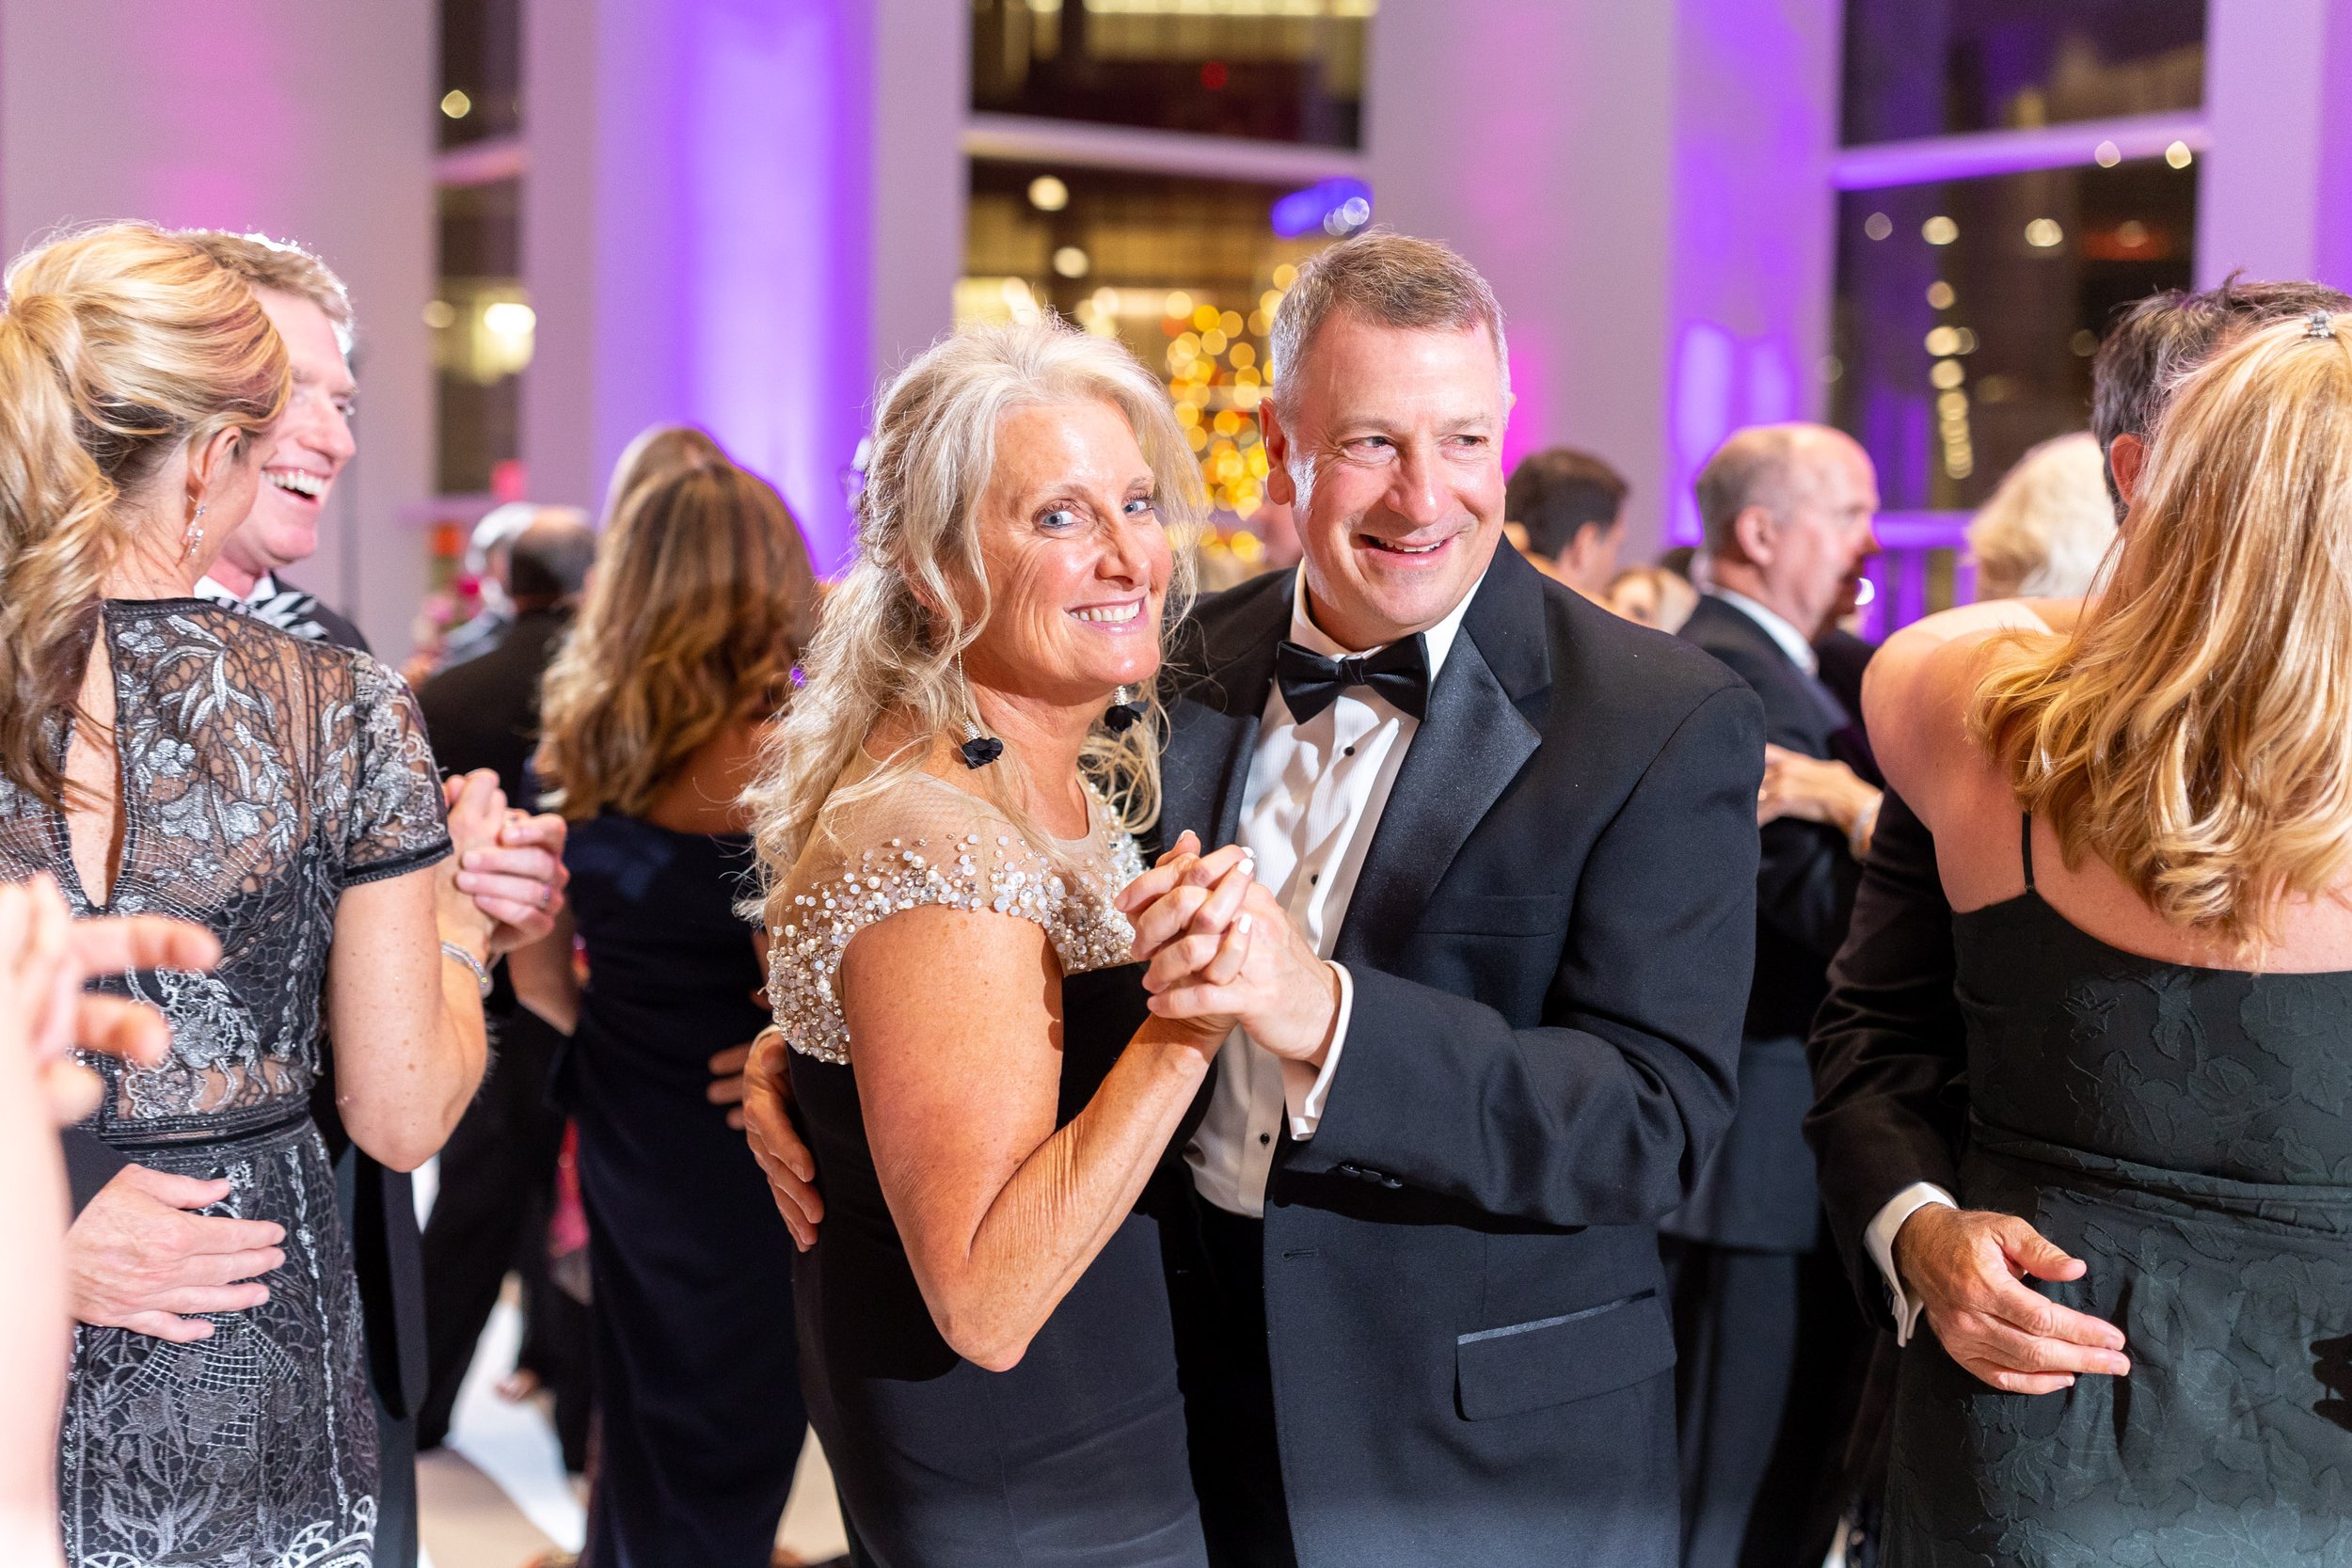 Couple dances during fun wedding reception at Capital One Hall